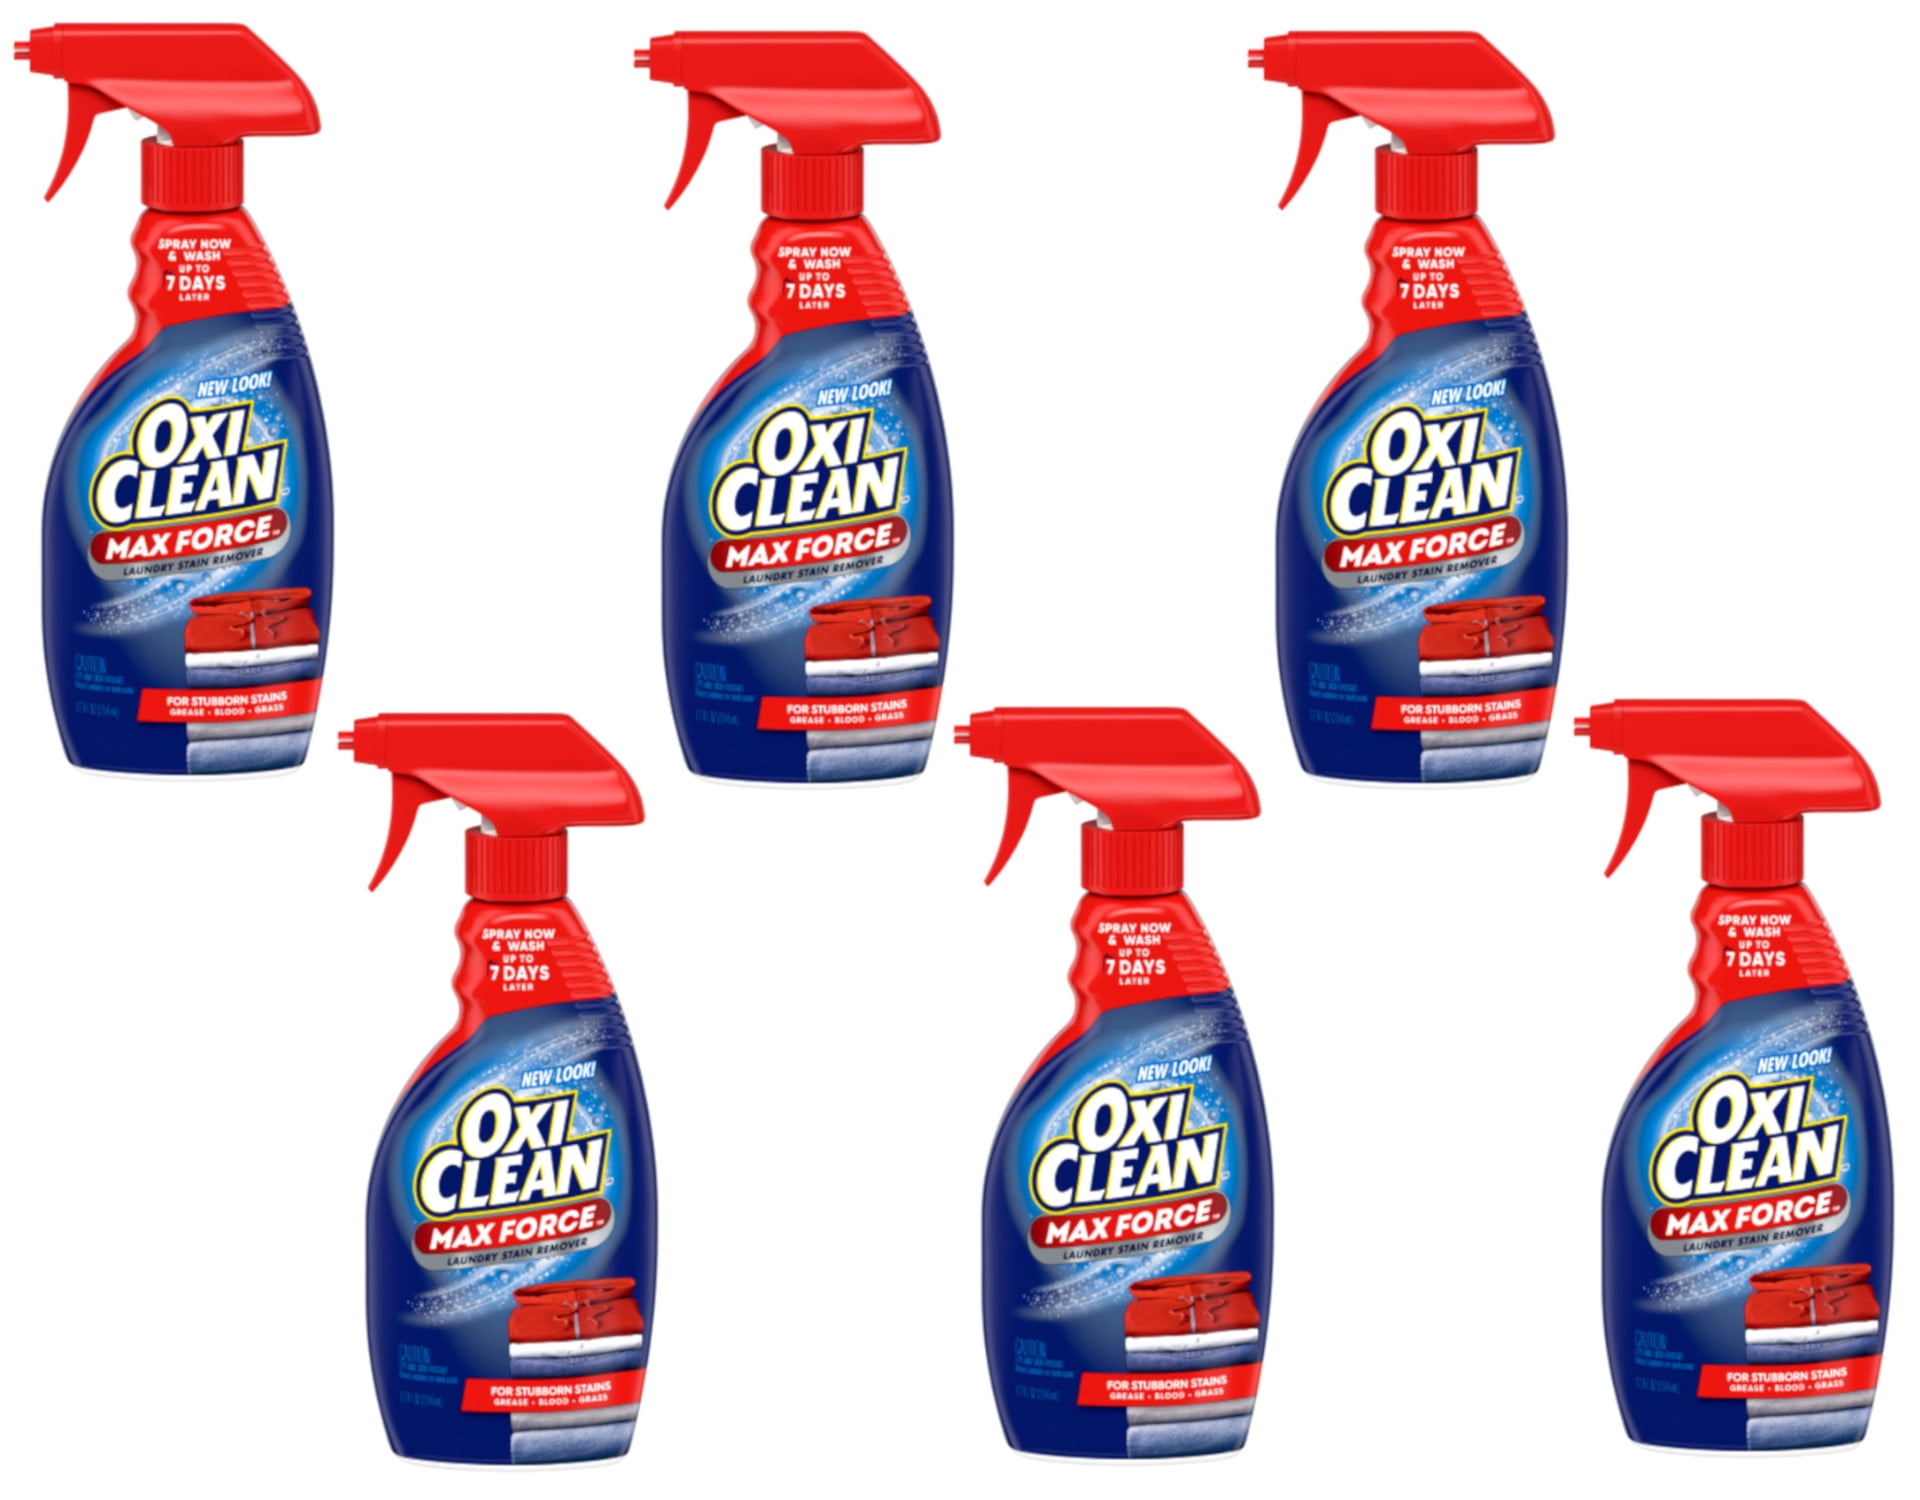 OxiClean Max Force Laundry Stain Remover Spray, 16 fl oz